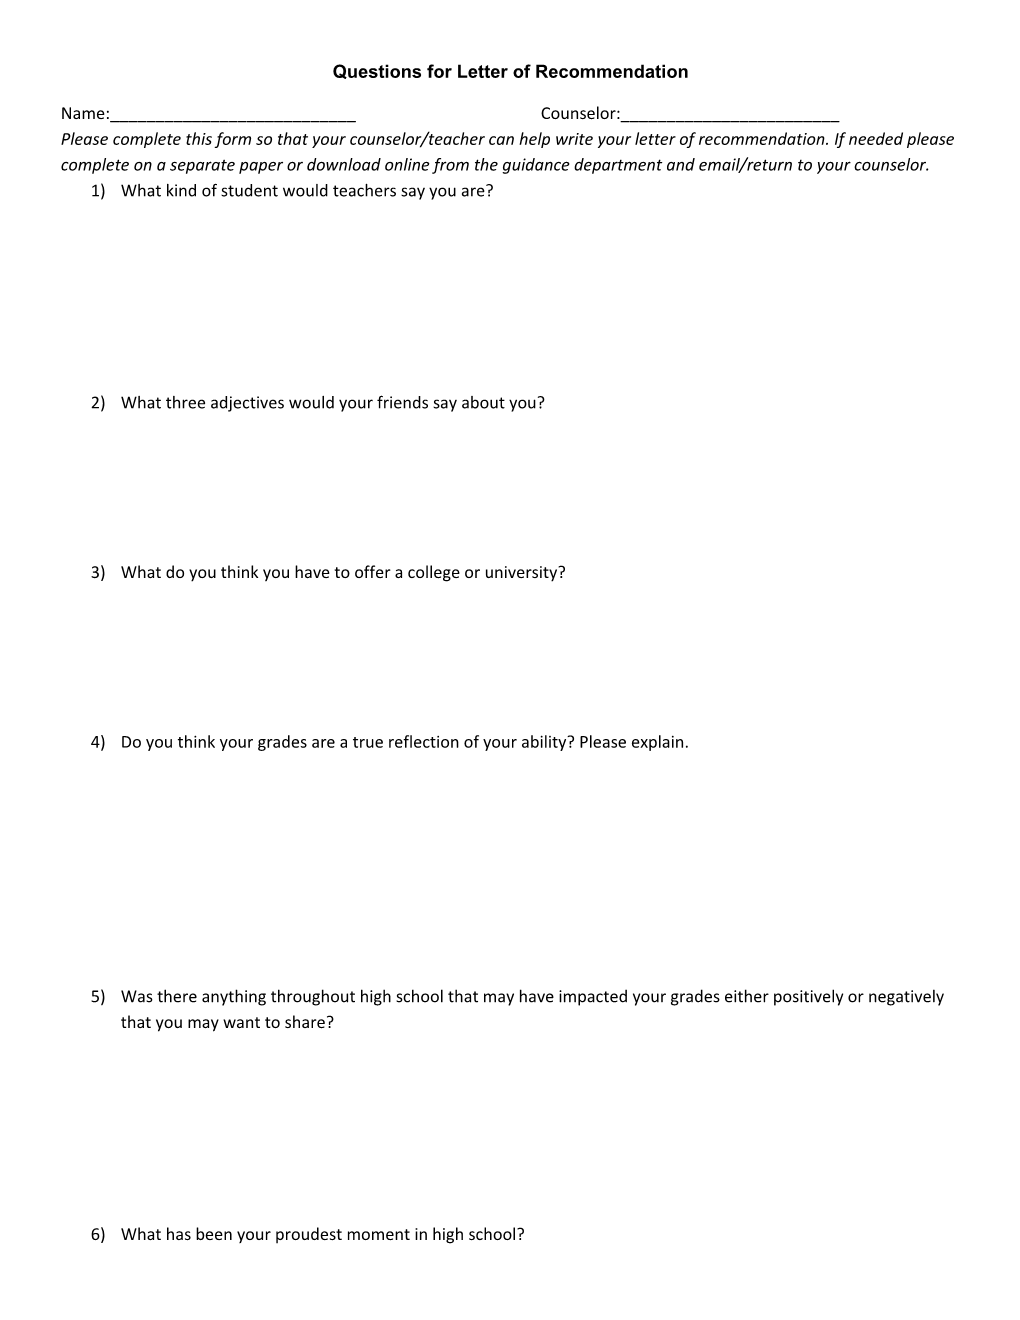 Questions for Letter of Recommendation